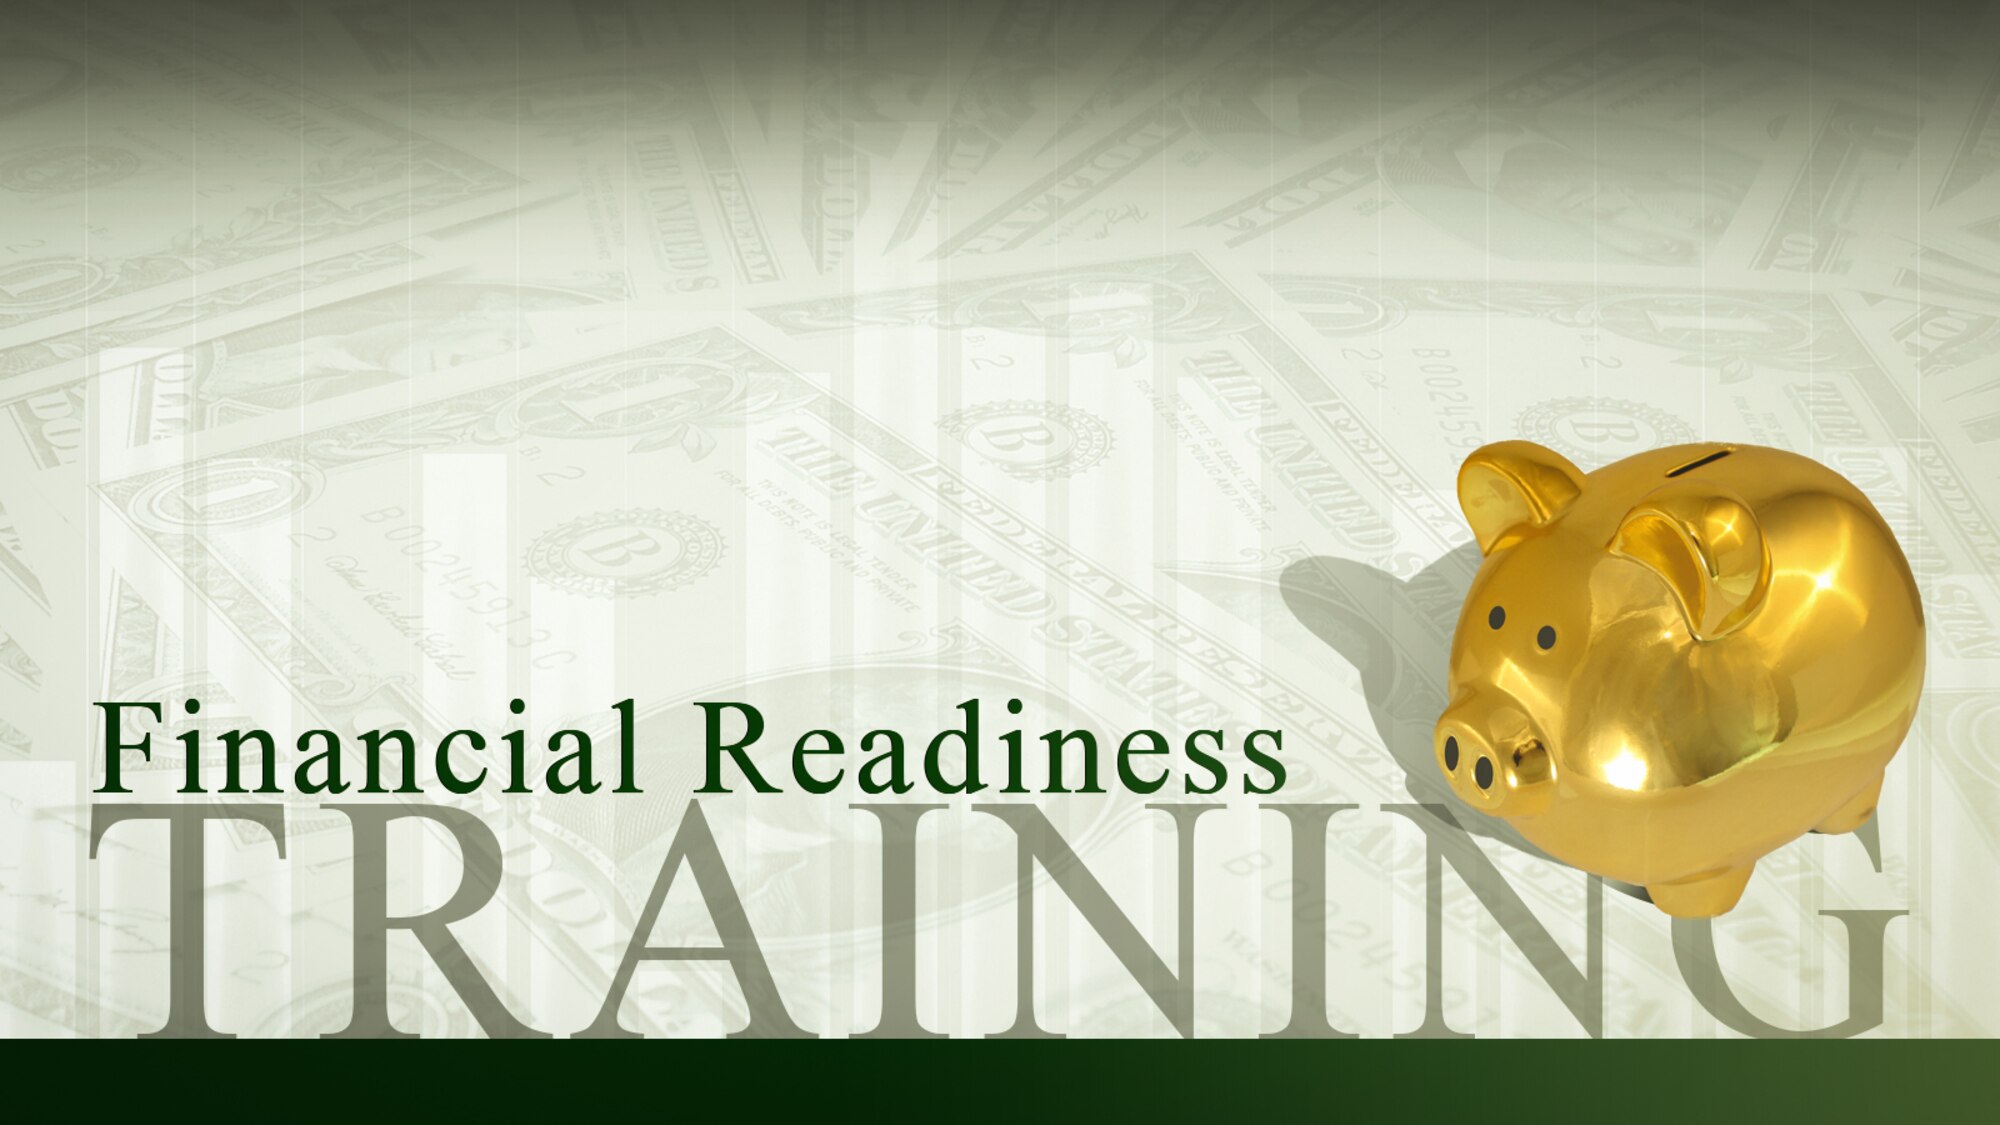 Financial Readiness Training Graphic